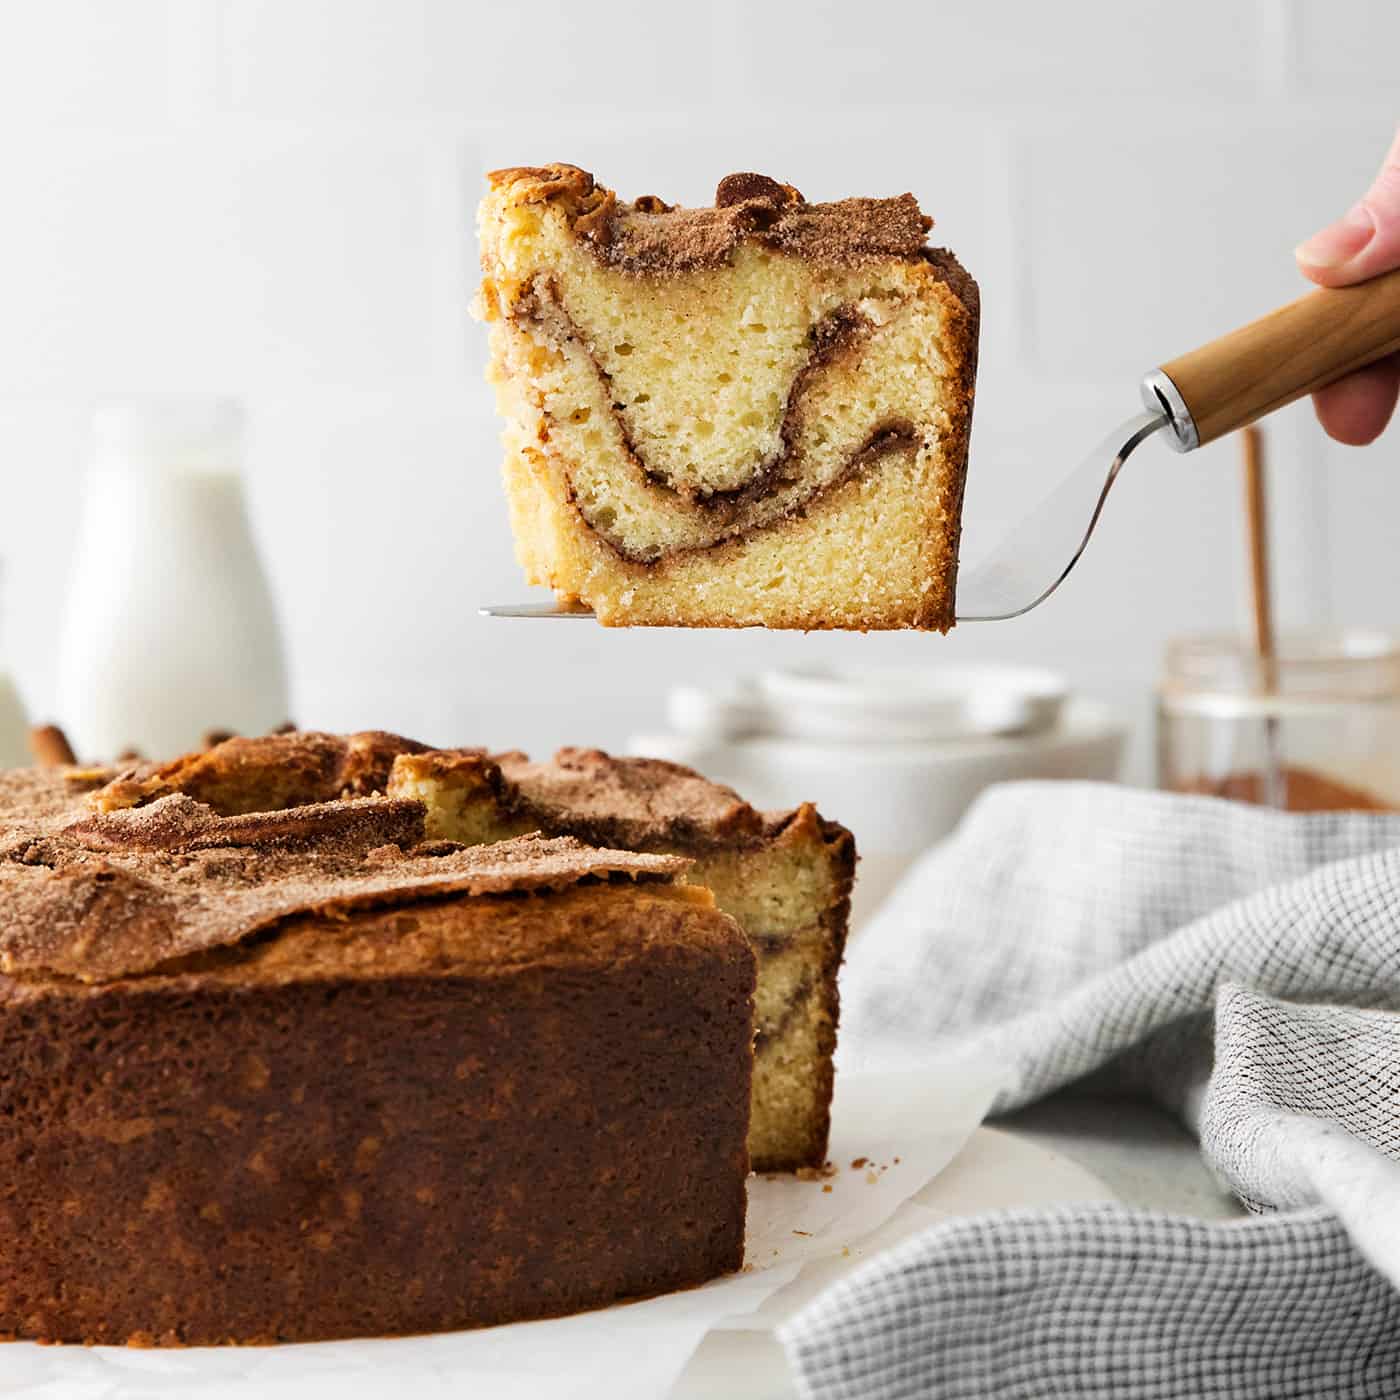 A spatula serving a slice of sour cream coffee cake with cinnamon ripple